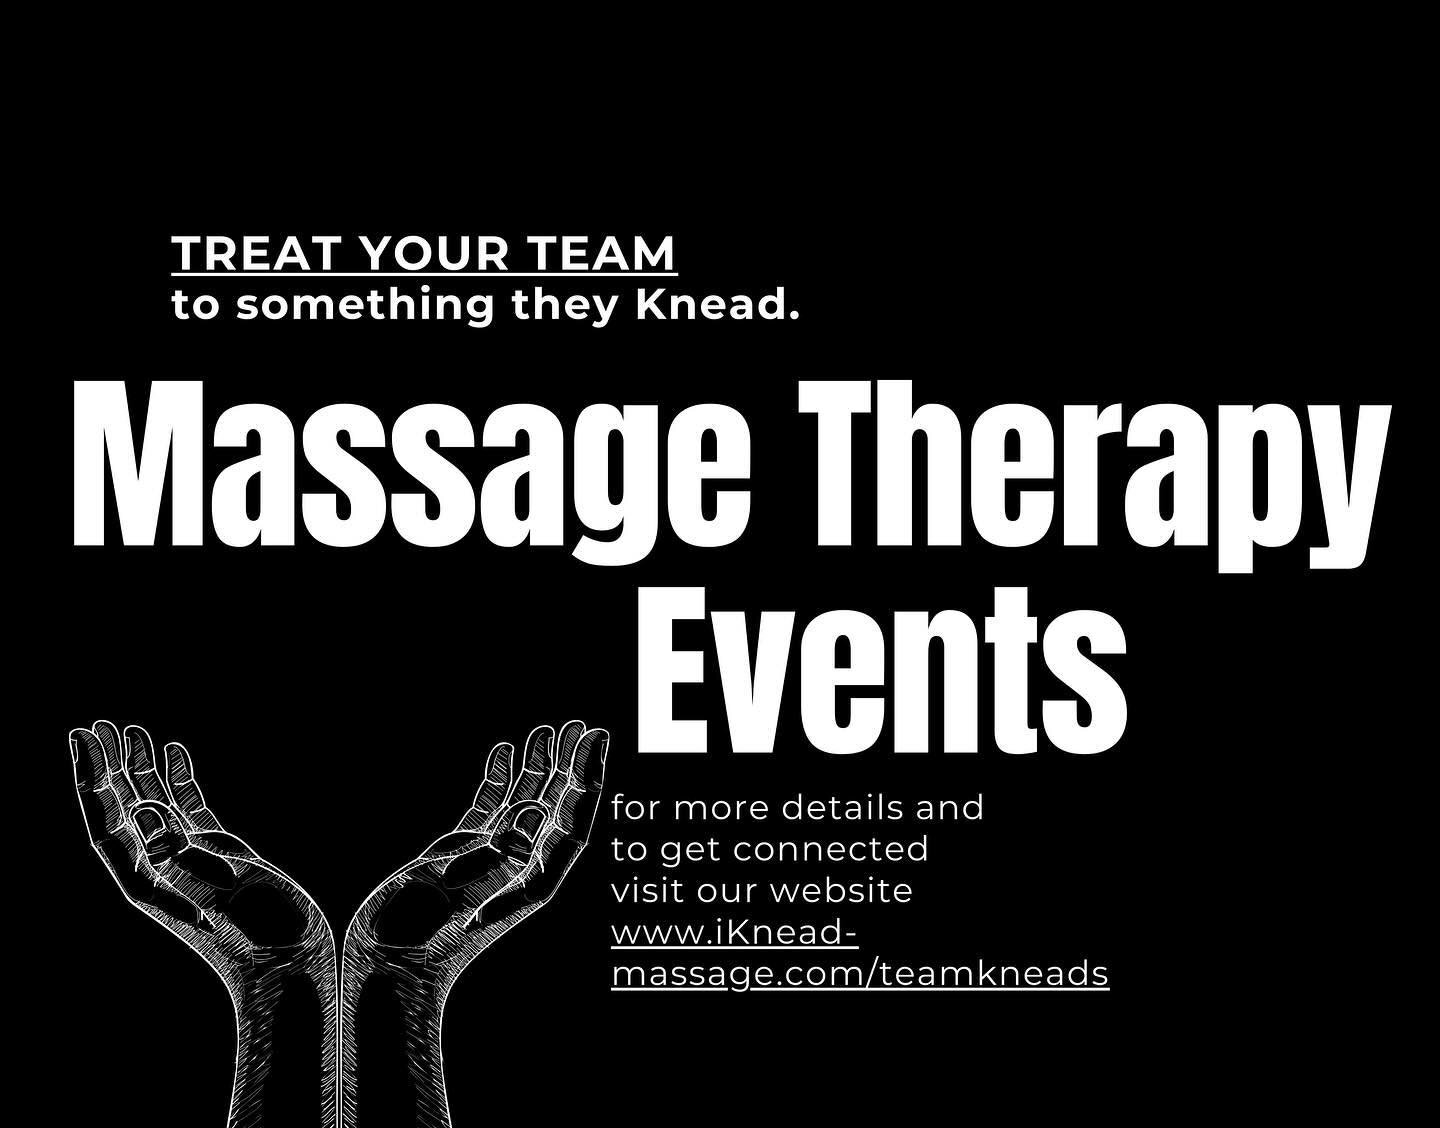 ❗️One of my favorite things about Massage Therapy is that it can be done anywhere! Let us help destress and reenergize your team for a strong close to the year. 

💭 iKnead Massage Events are perfect for Staff Appreciation, Parties, Sporting Events..